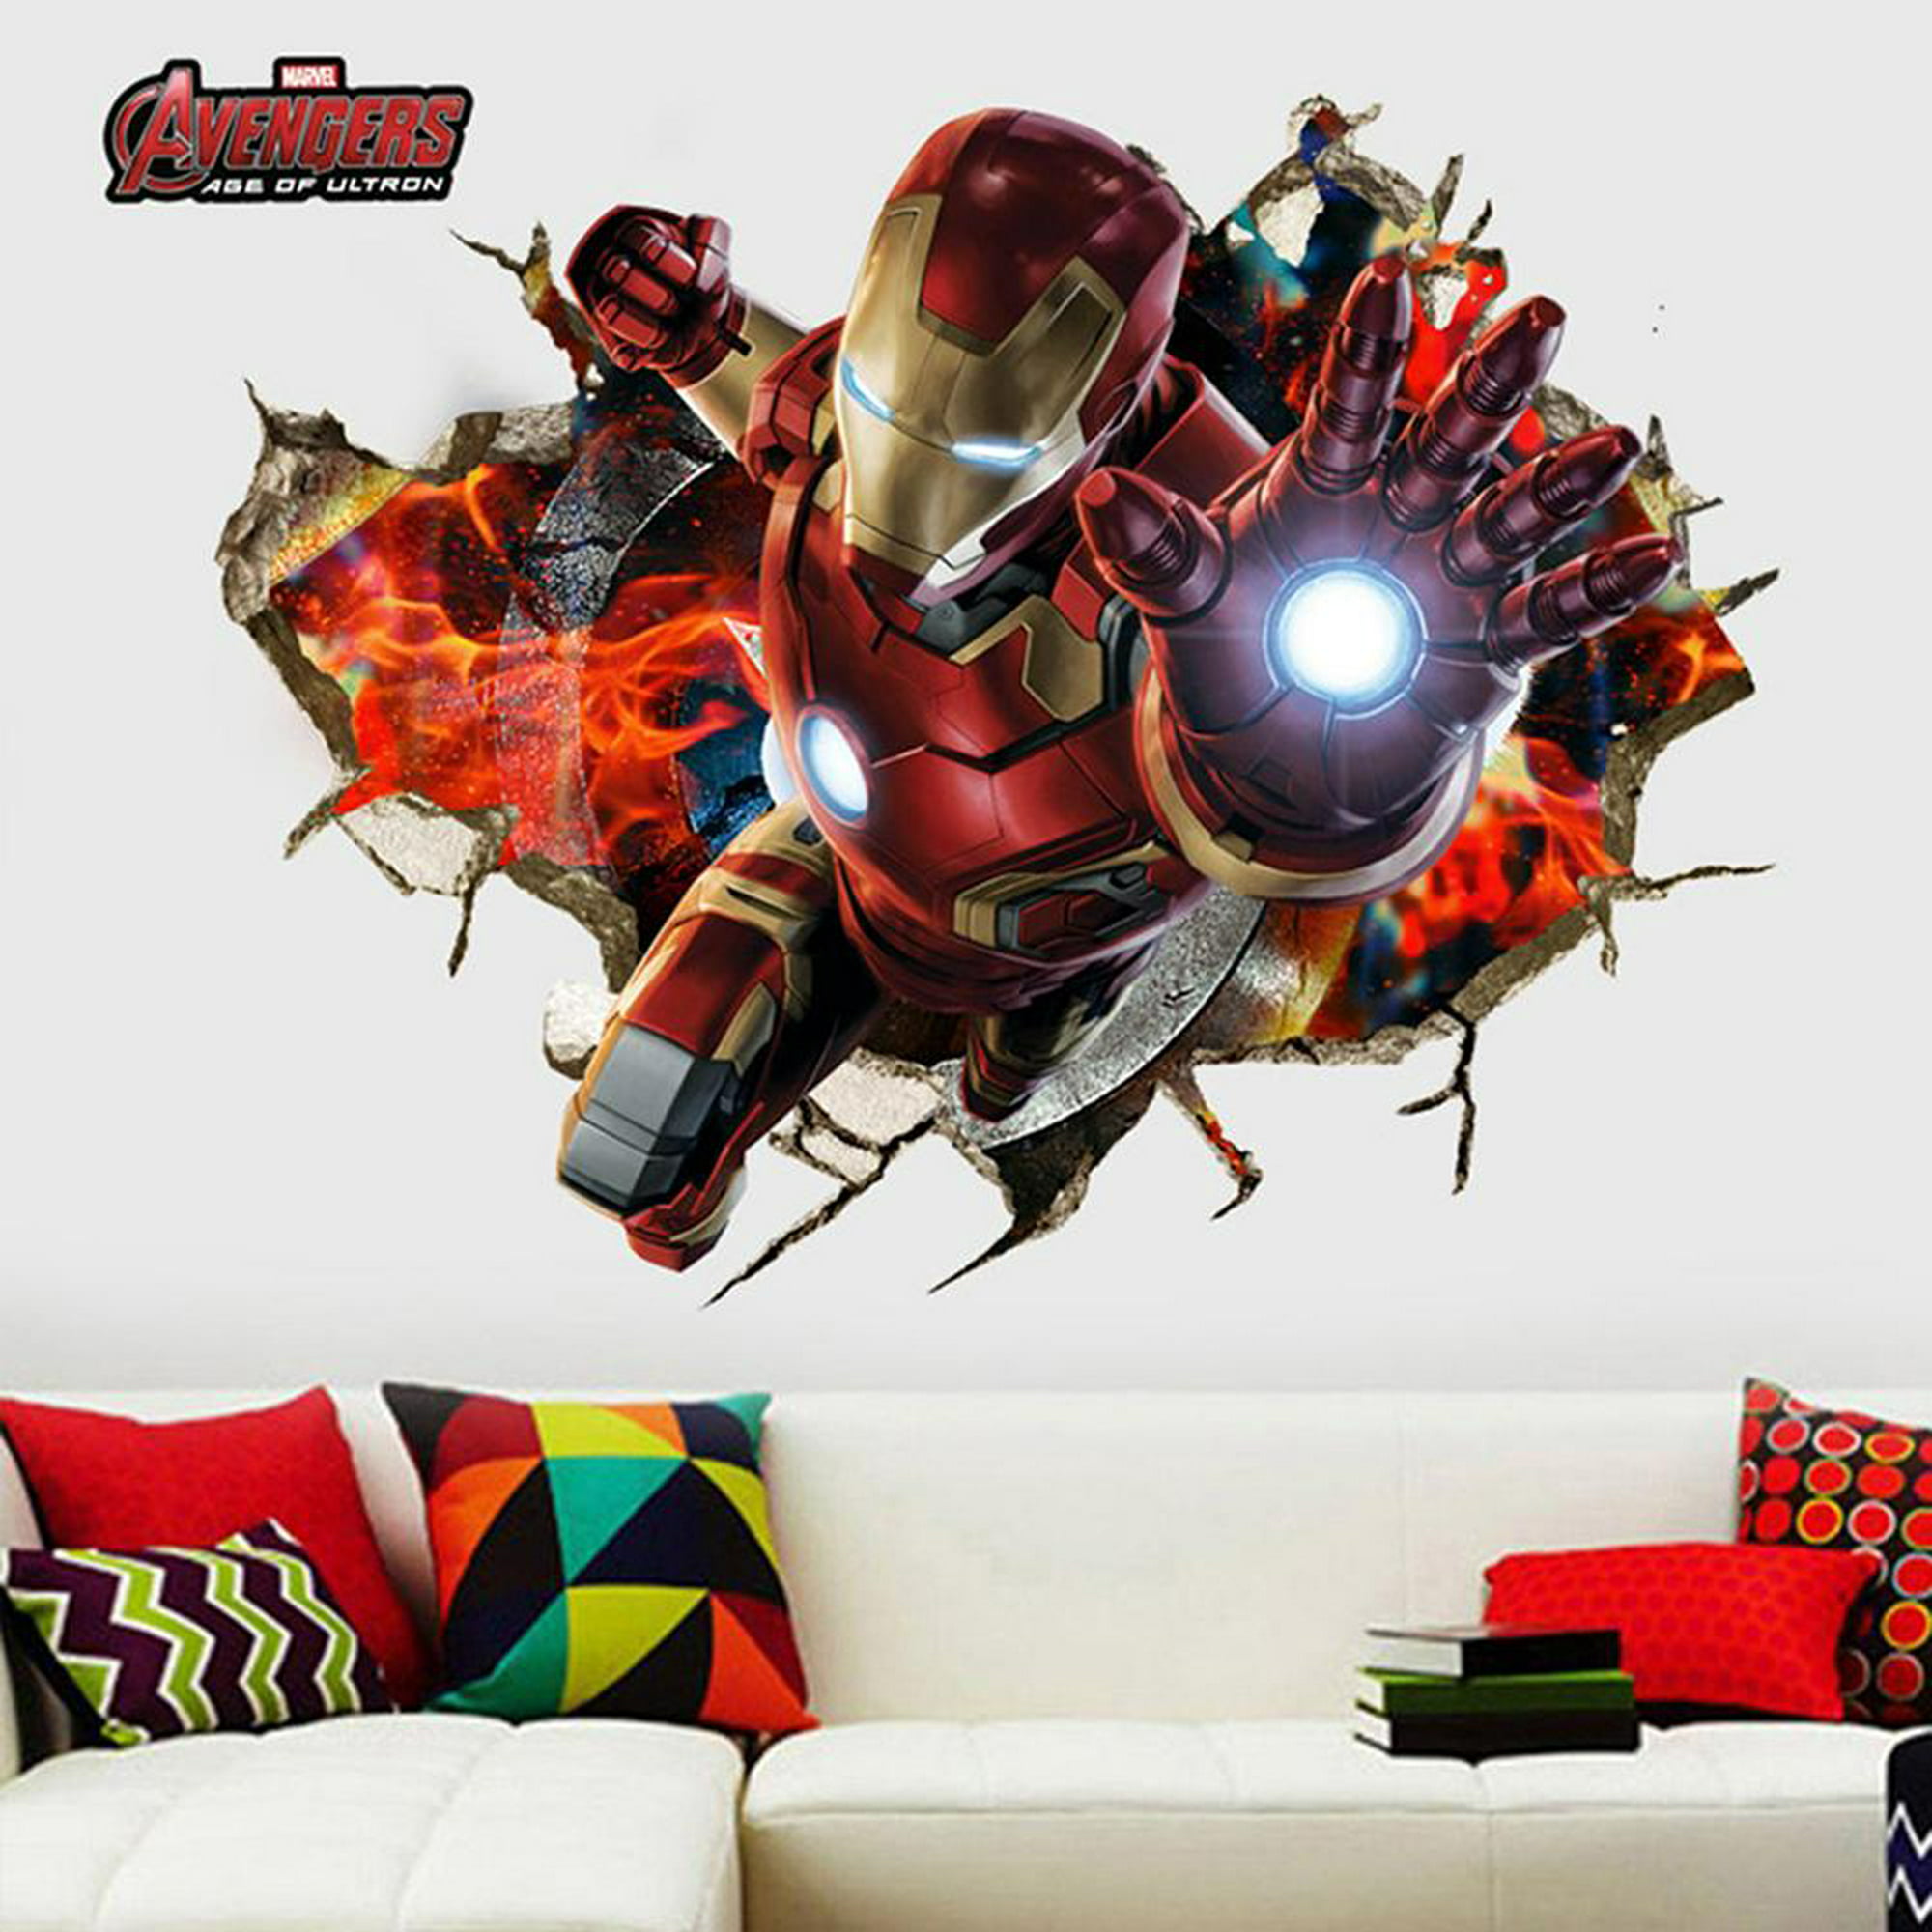 (C-A03) STICKERS PEGATINA MARVEL - PVC IMPERMEABLE